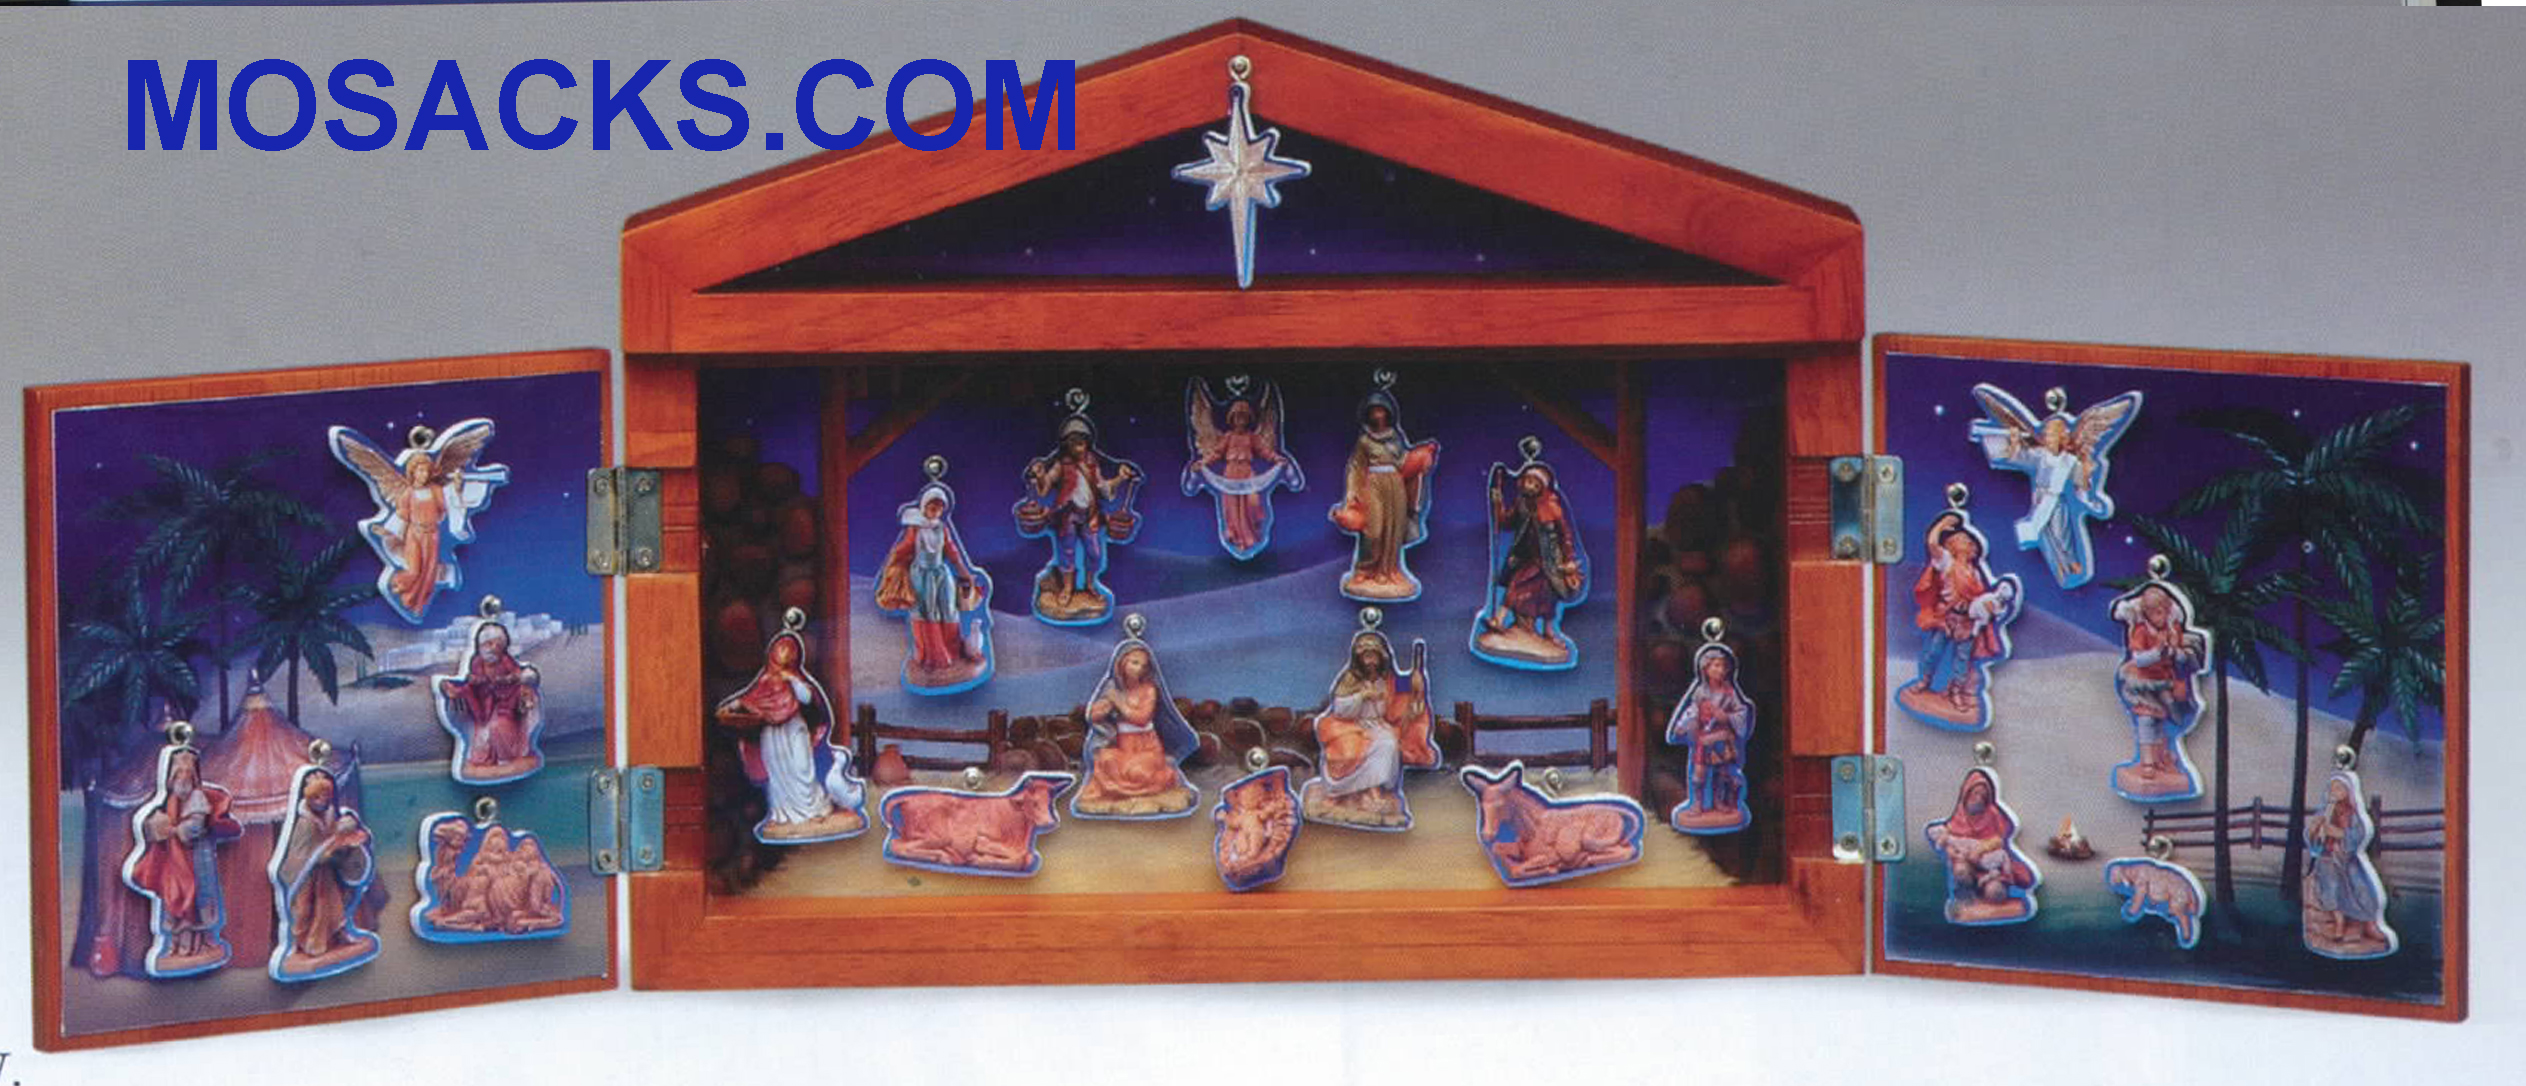 Fontanini Advent Calendar Nativity Scene with Wood Stable 65400 is an 8.75" H x 11.25" W x 2.5" D Advent Calendar  Wood/Paper Gift Box